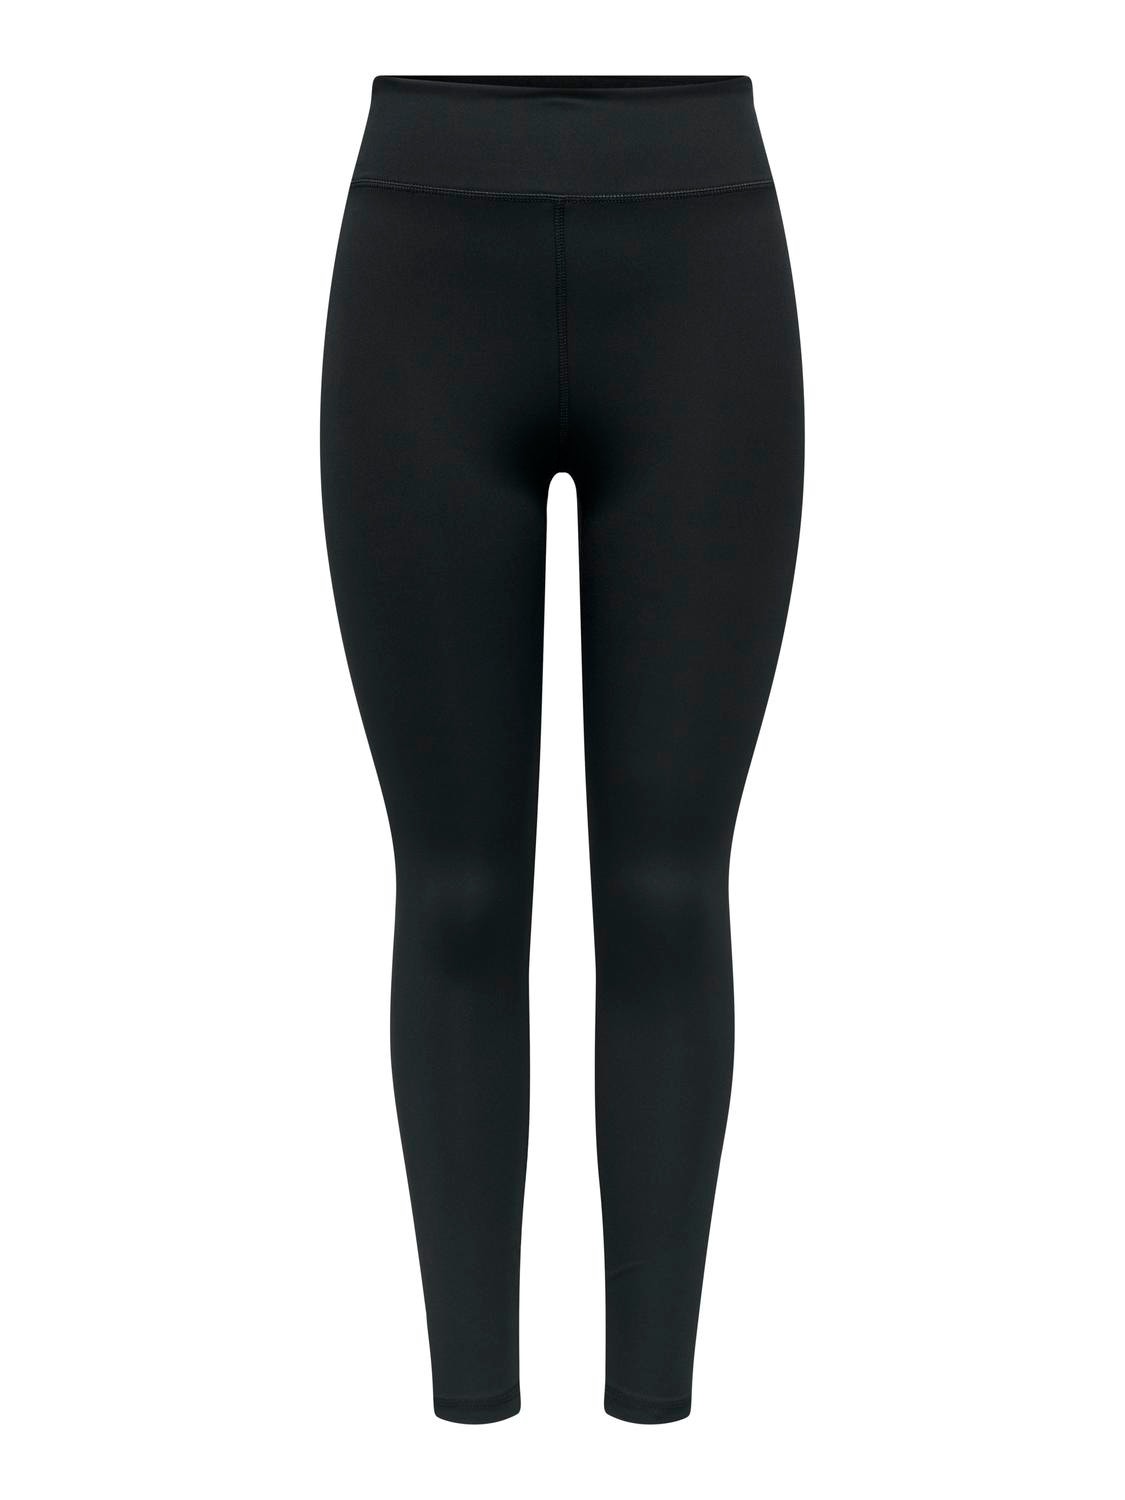 ONLY Tight fit High waist Legging -Black - 15295218